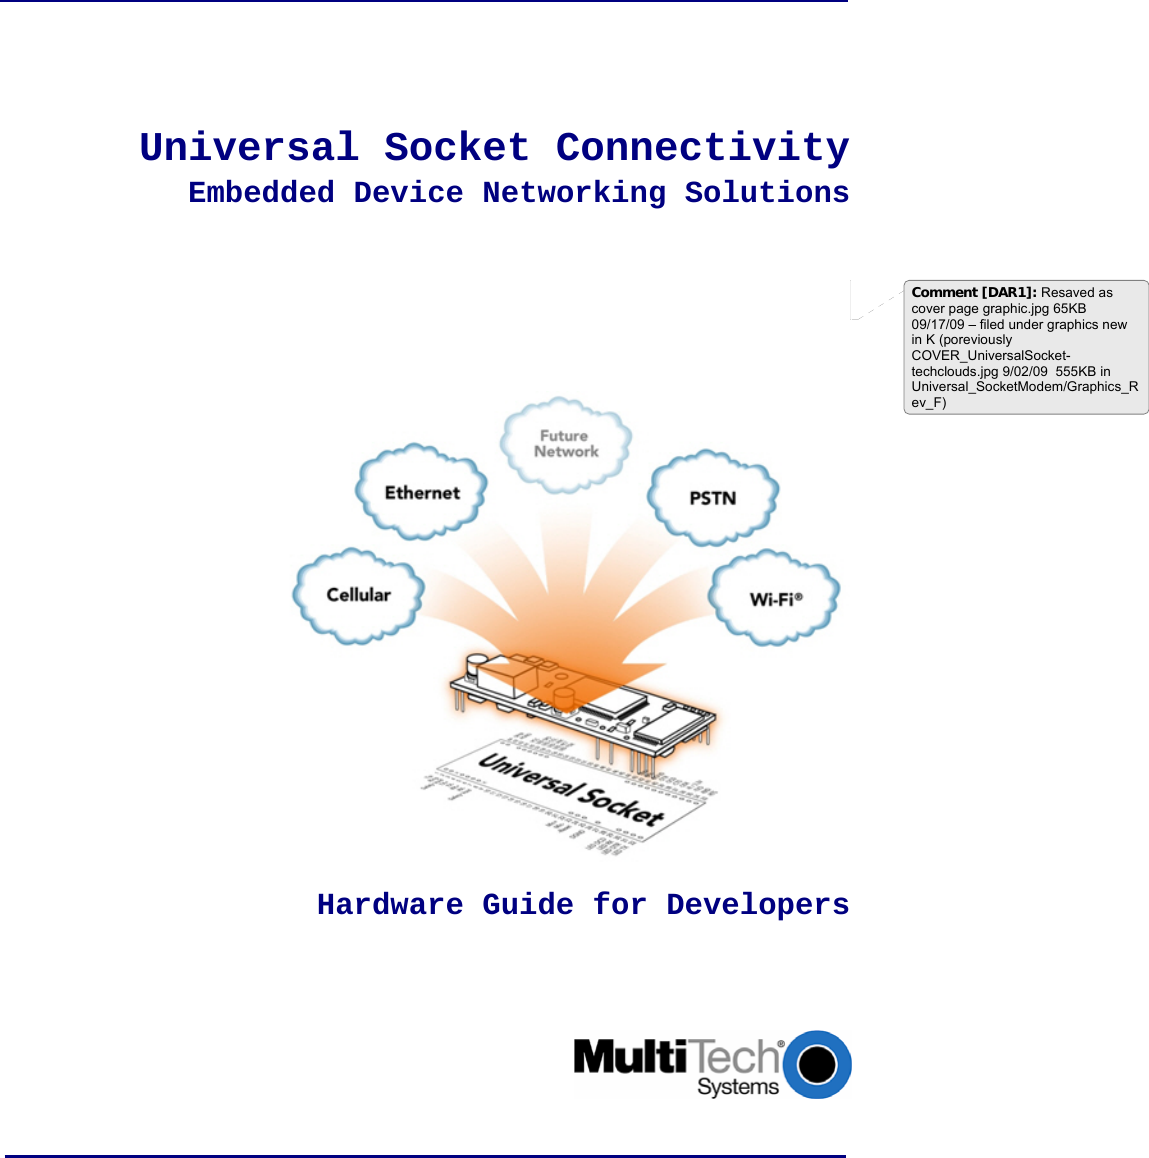              Universal Socket Connectivity  Embedded Device Networking Solutions            Hardware Guide for Developers       Comment [DAR1]: Resaved as cover page graphic.jpg 65KB  09/17/09 – filed under graphics new in K (poreviously COVER_UniversalSocket-techclouds.jpg 9/02/09  555KB in Universal_SocketModem/Graphics_Rev_F) 